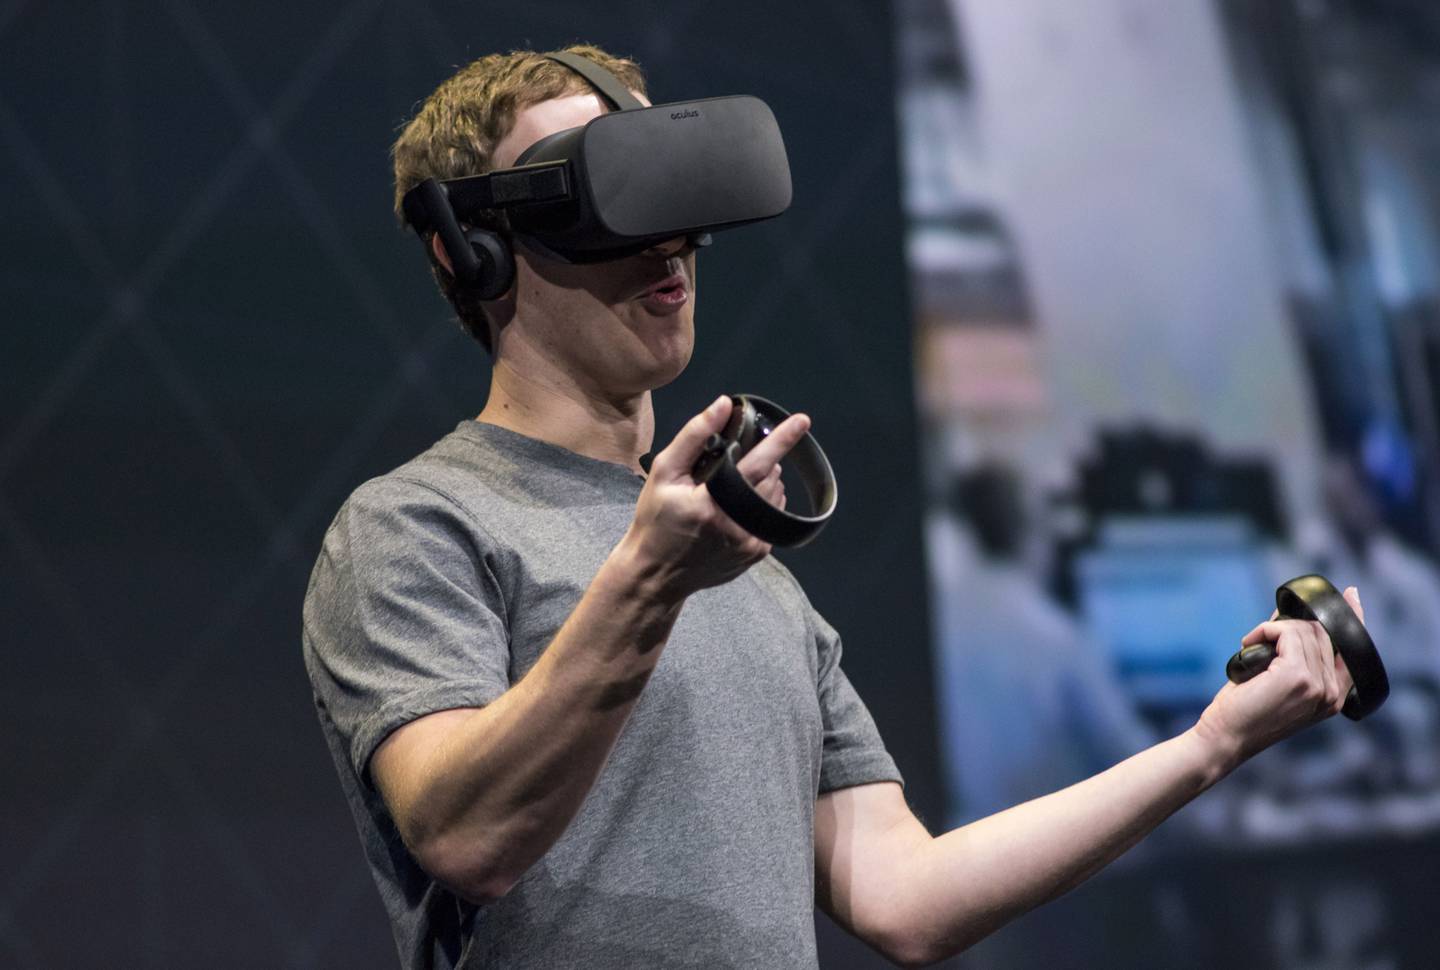 Facebook's founder and CEO shows the Oculus Rift in a company event in 2016.